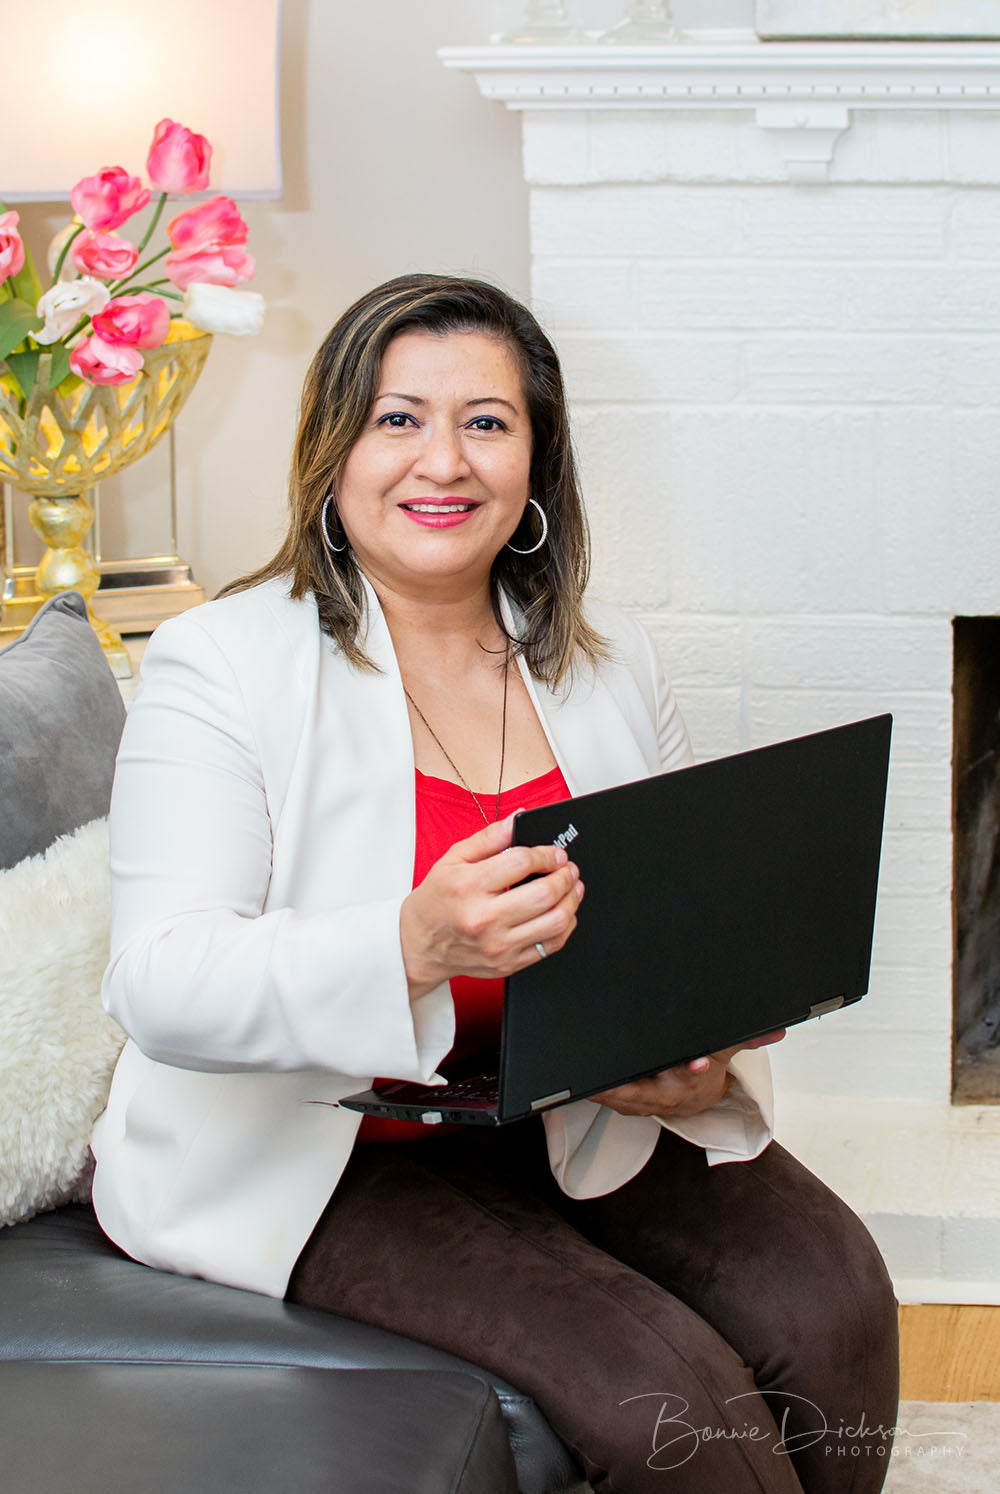 Woman sitting holding a laptop and smiling